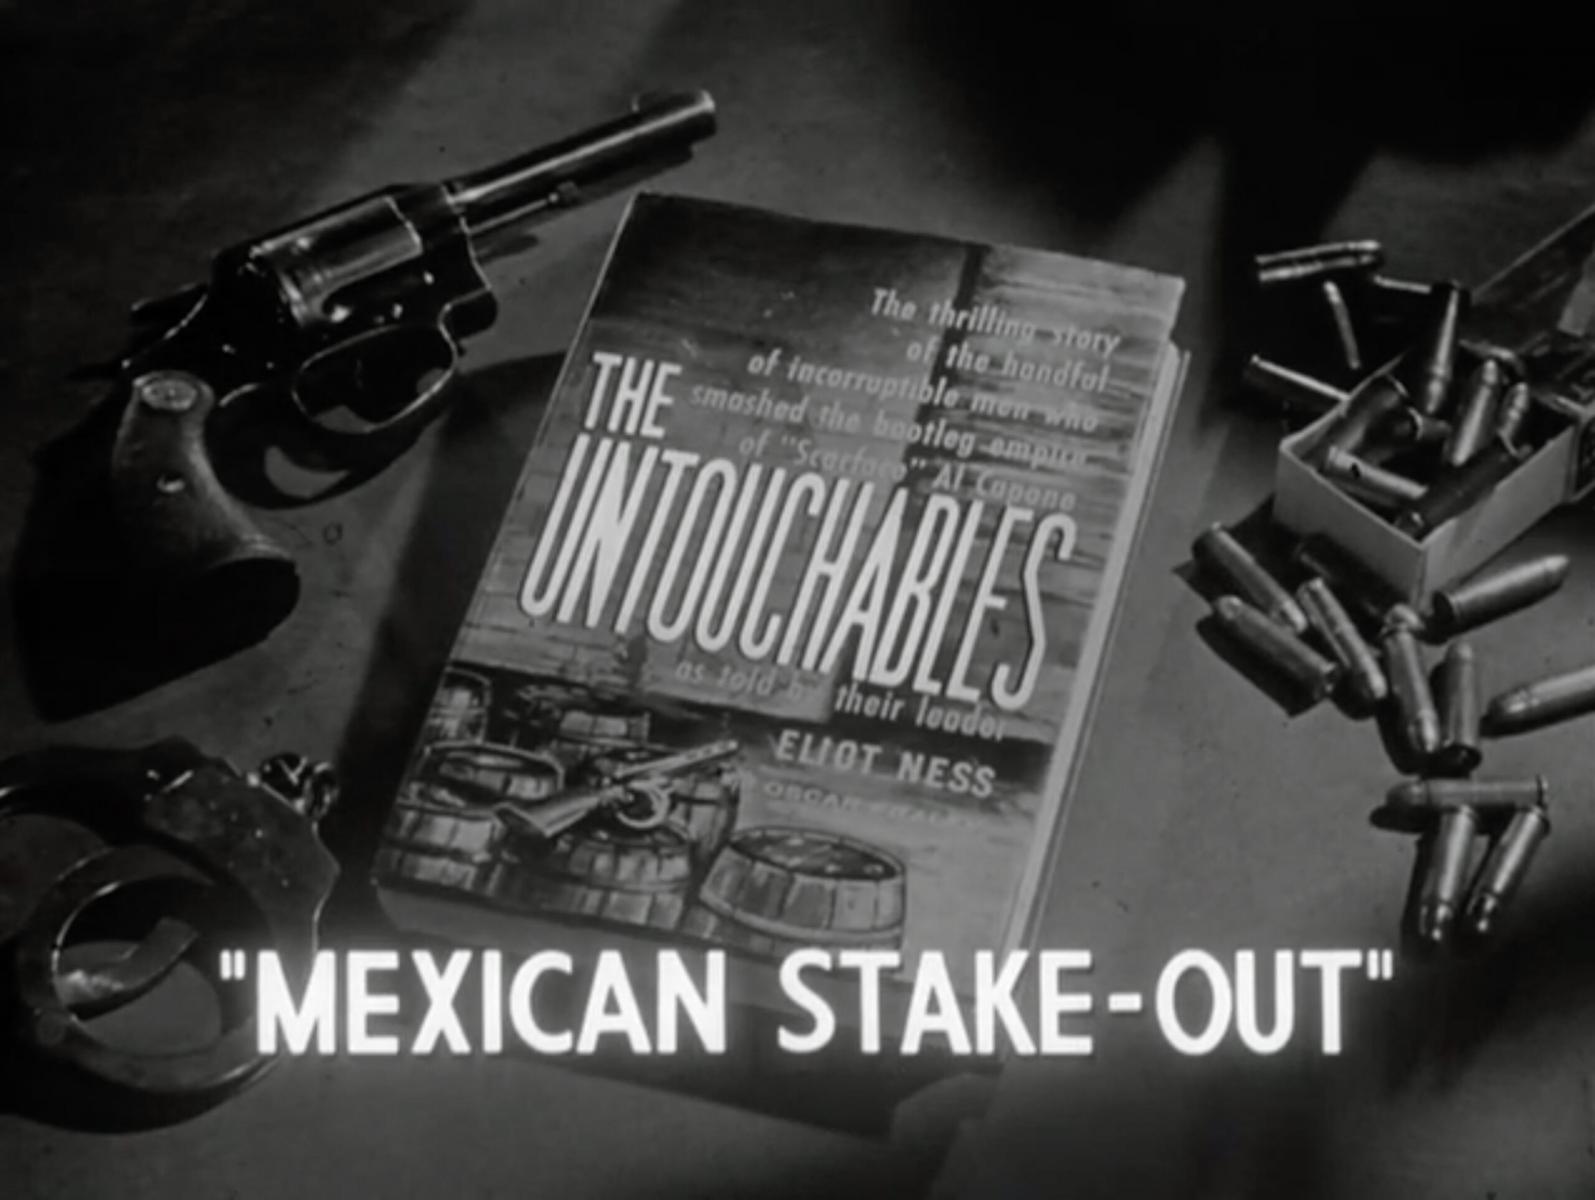 The Untouchables: Mexican Stake-Out (TV)